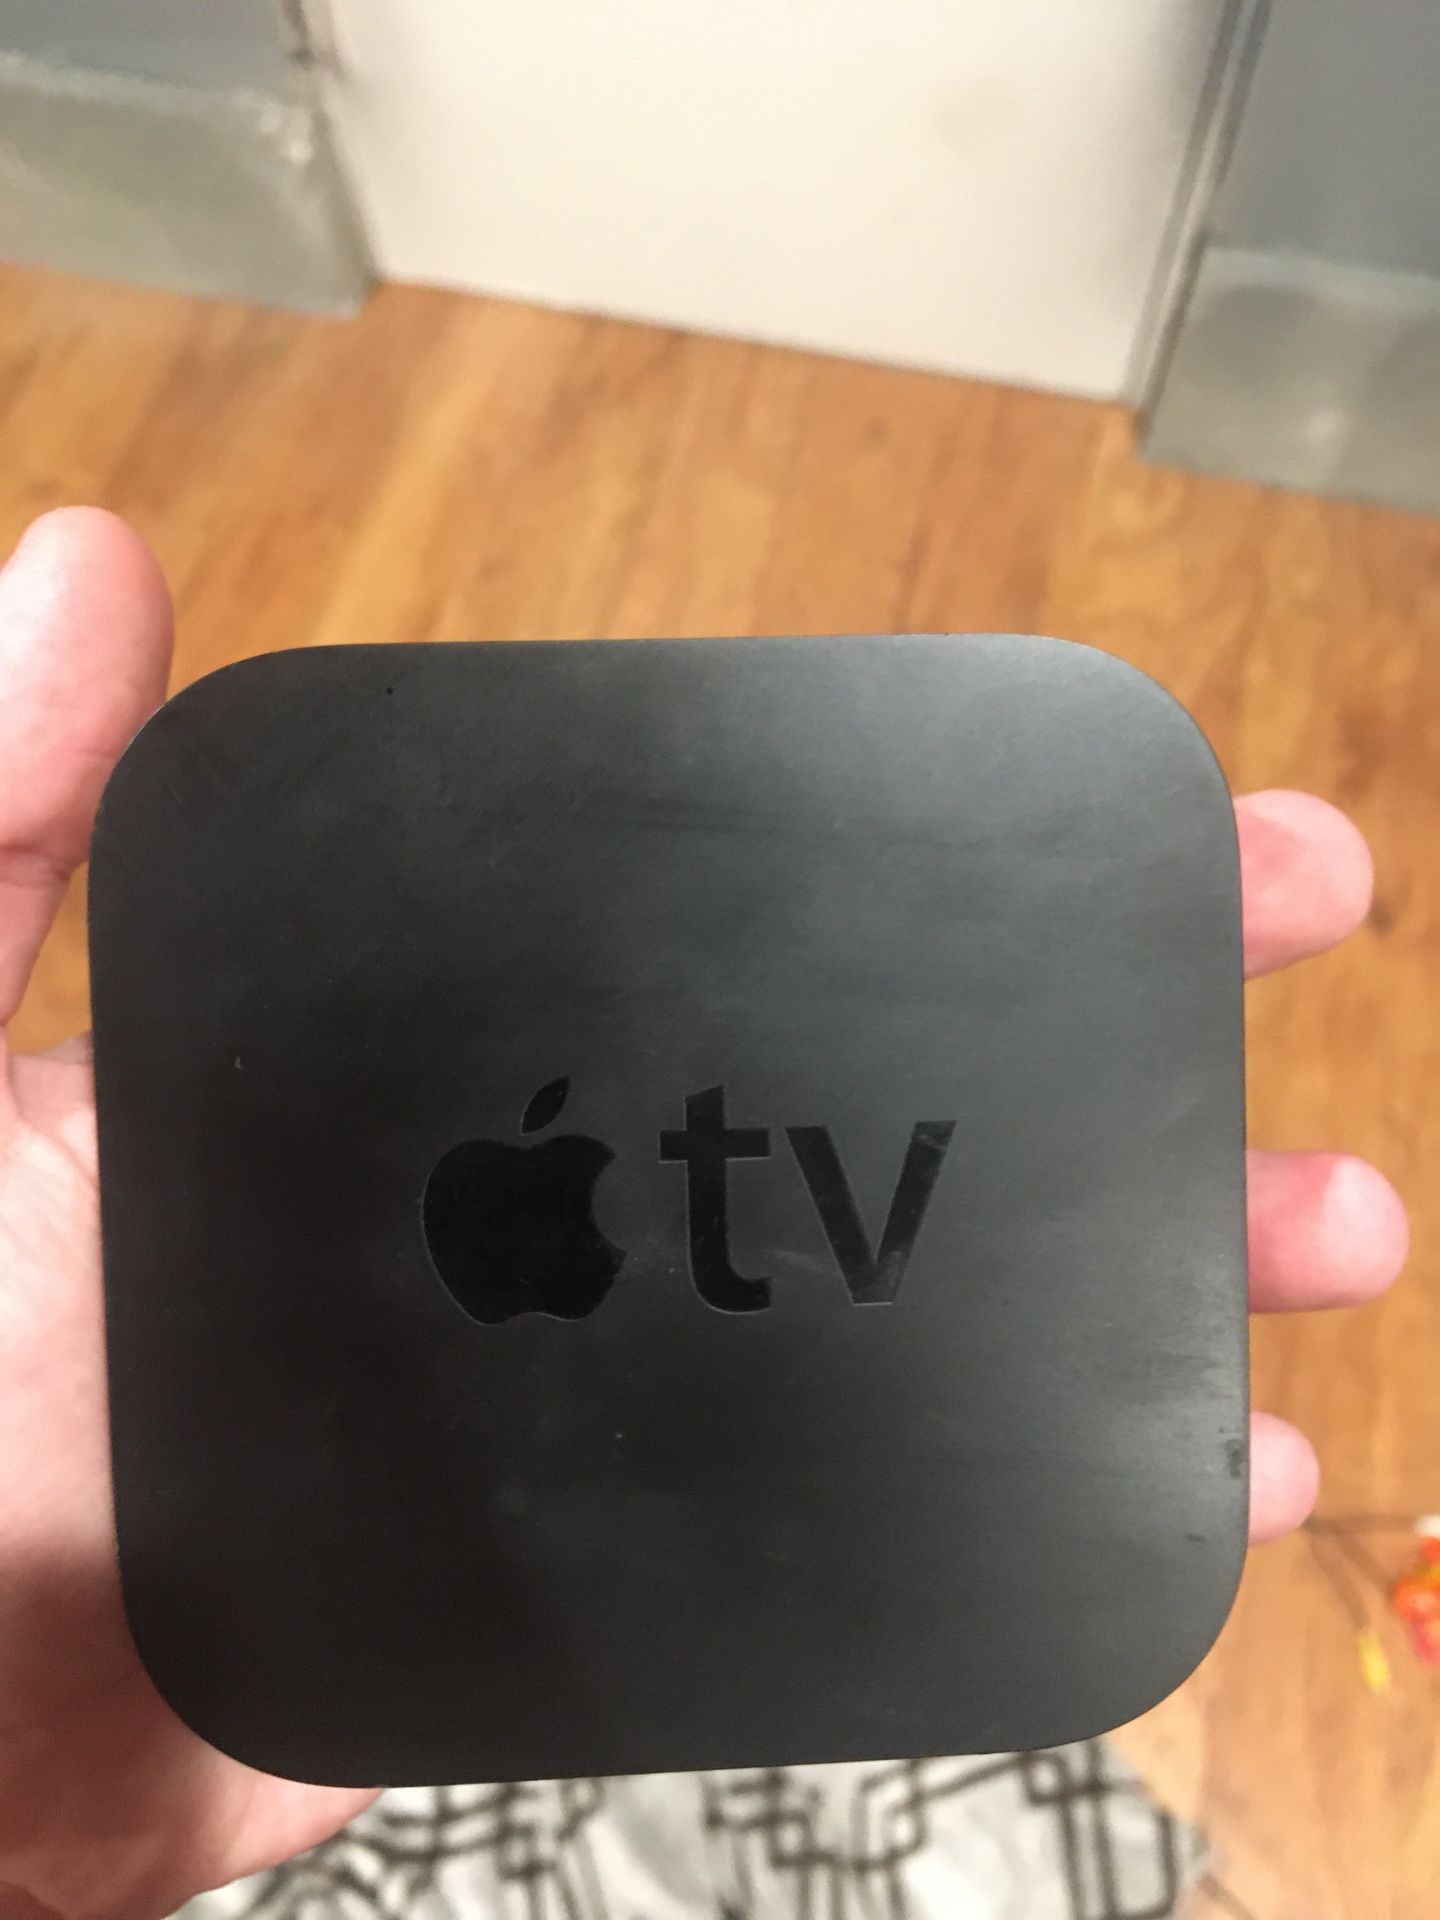 Apple TV ( no remote or power cable )